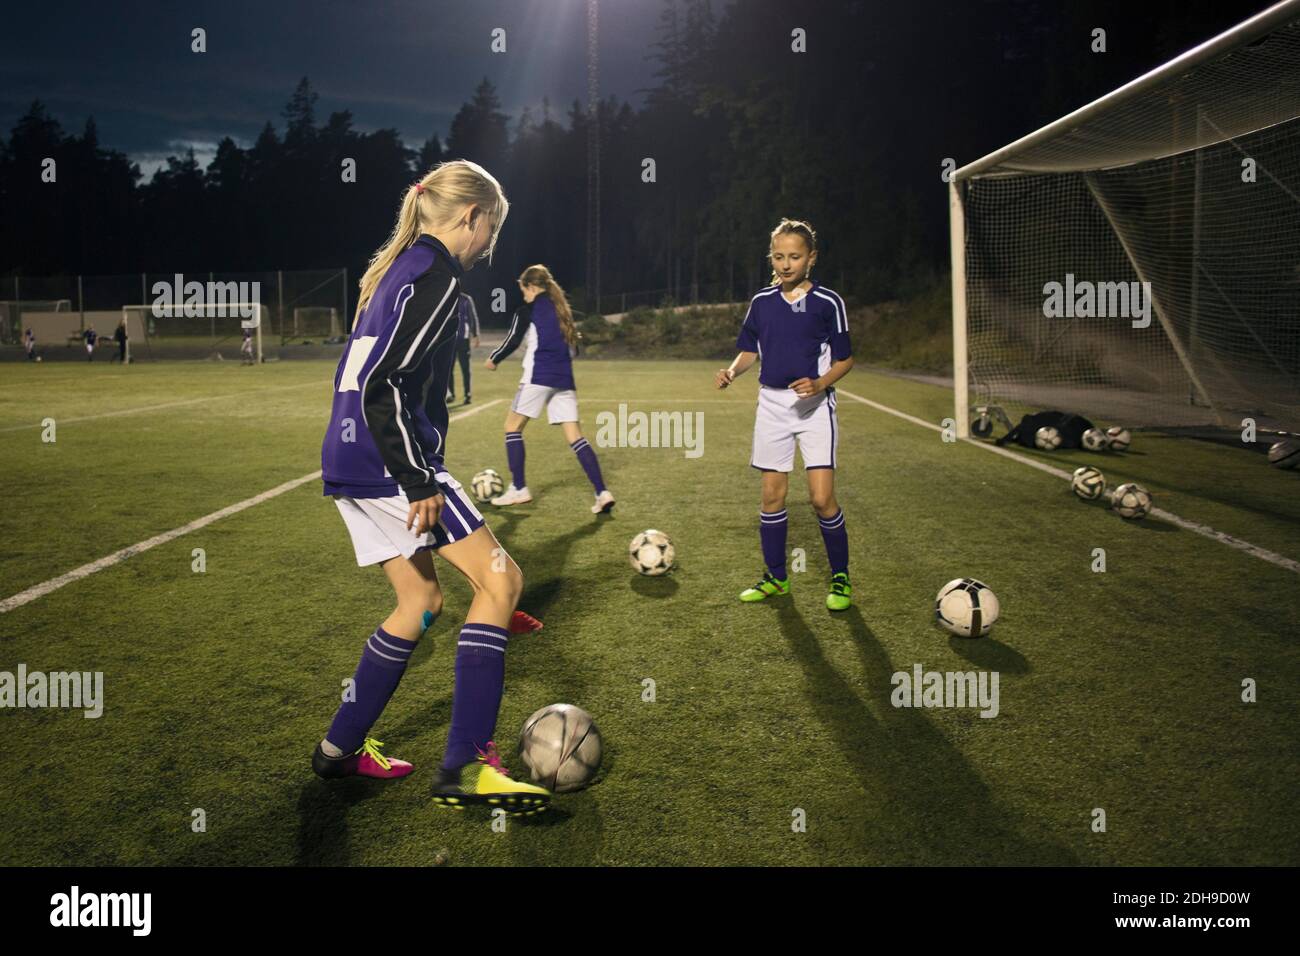 Girls practicing with soccer balls by goal post on field at night Stock Photo